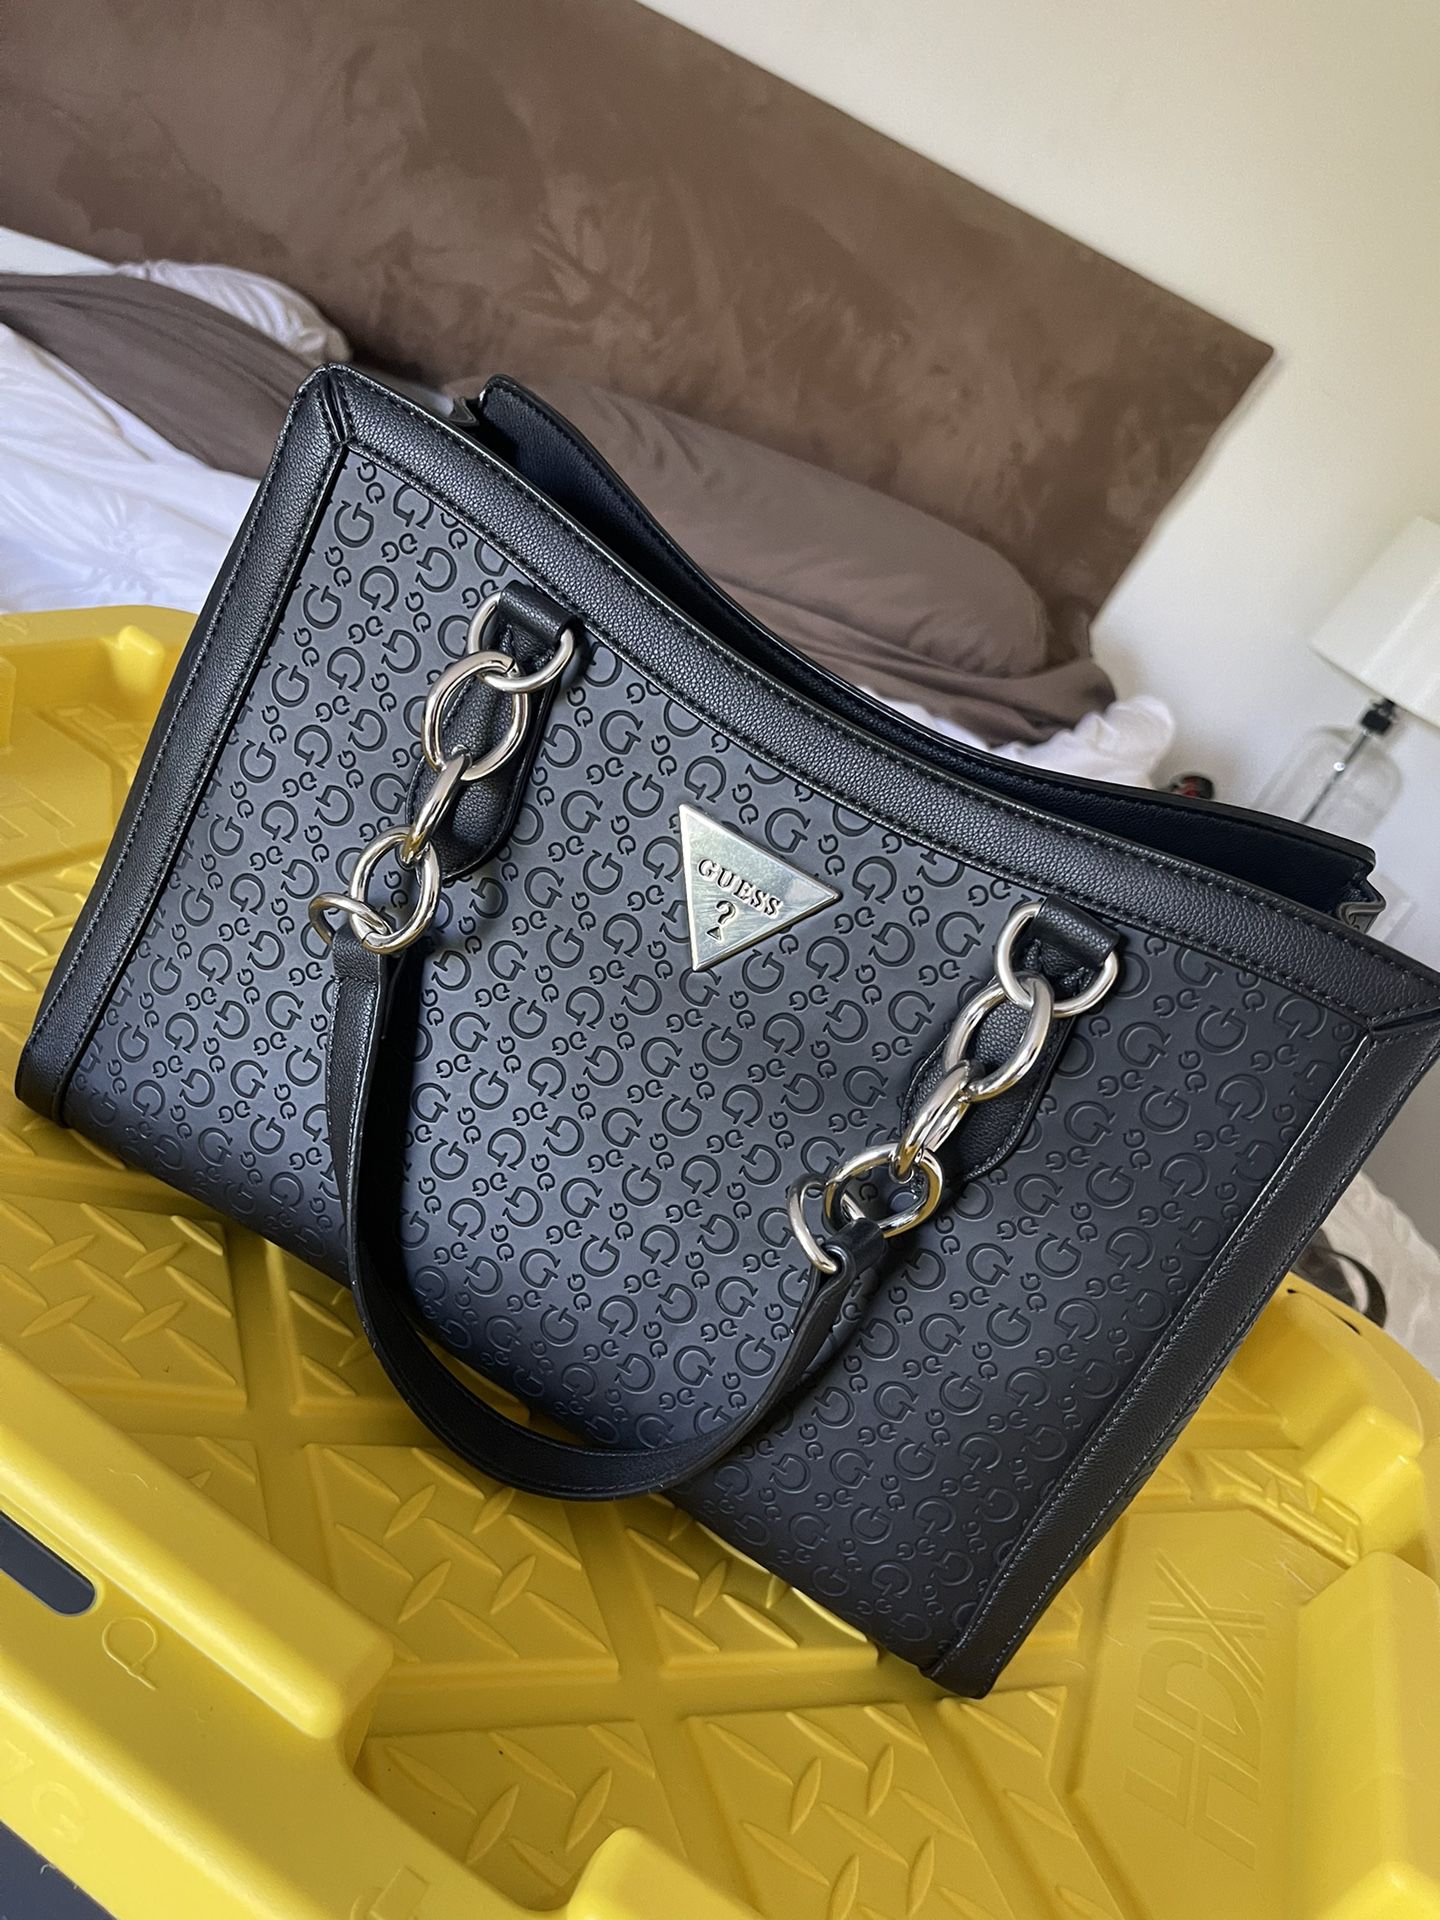 Guess Bag - Never Used 